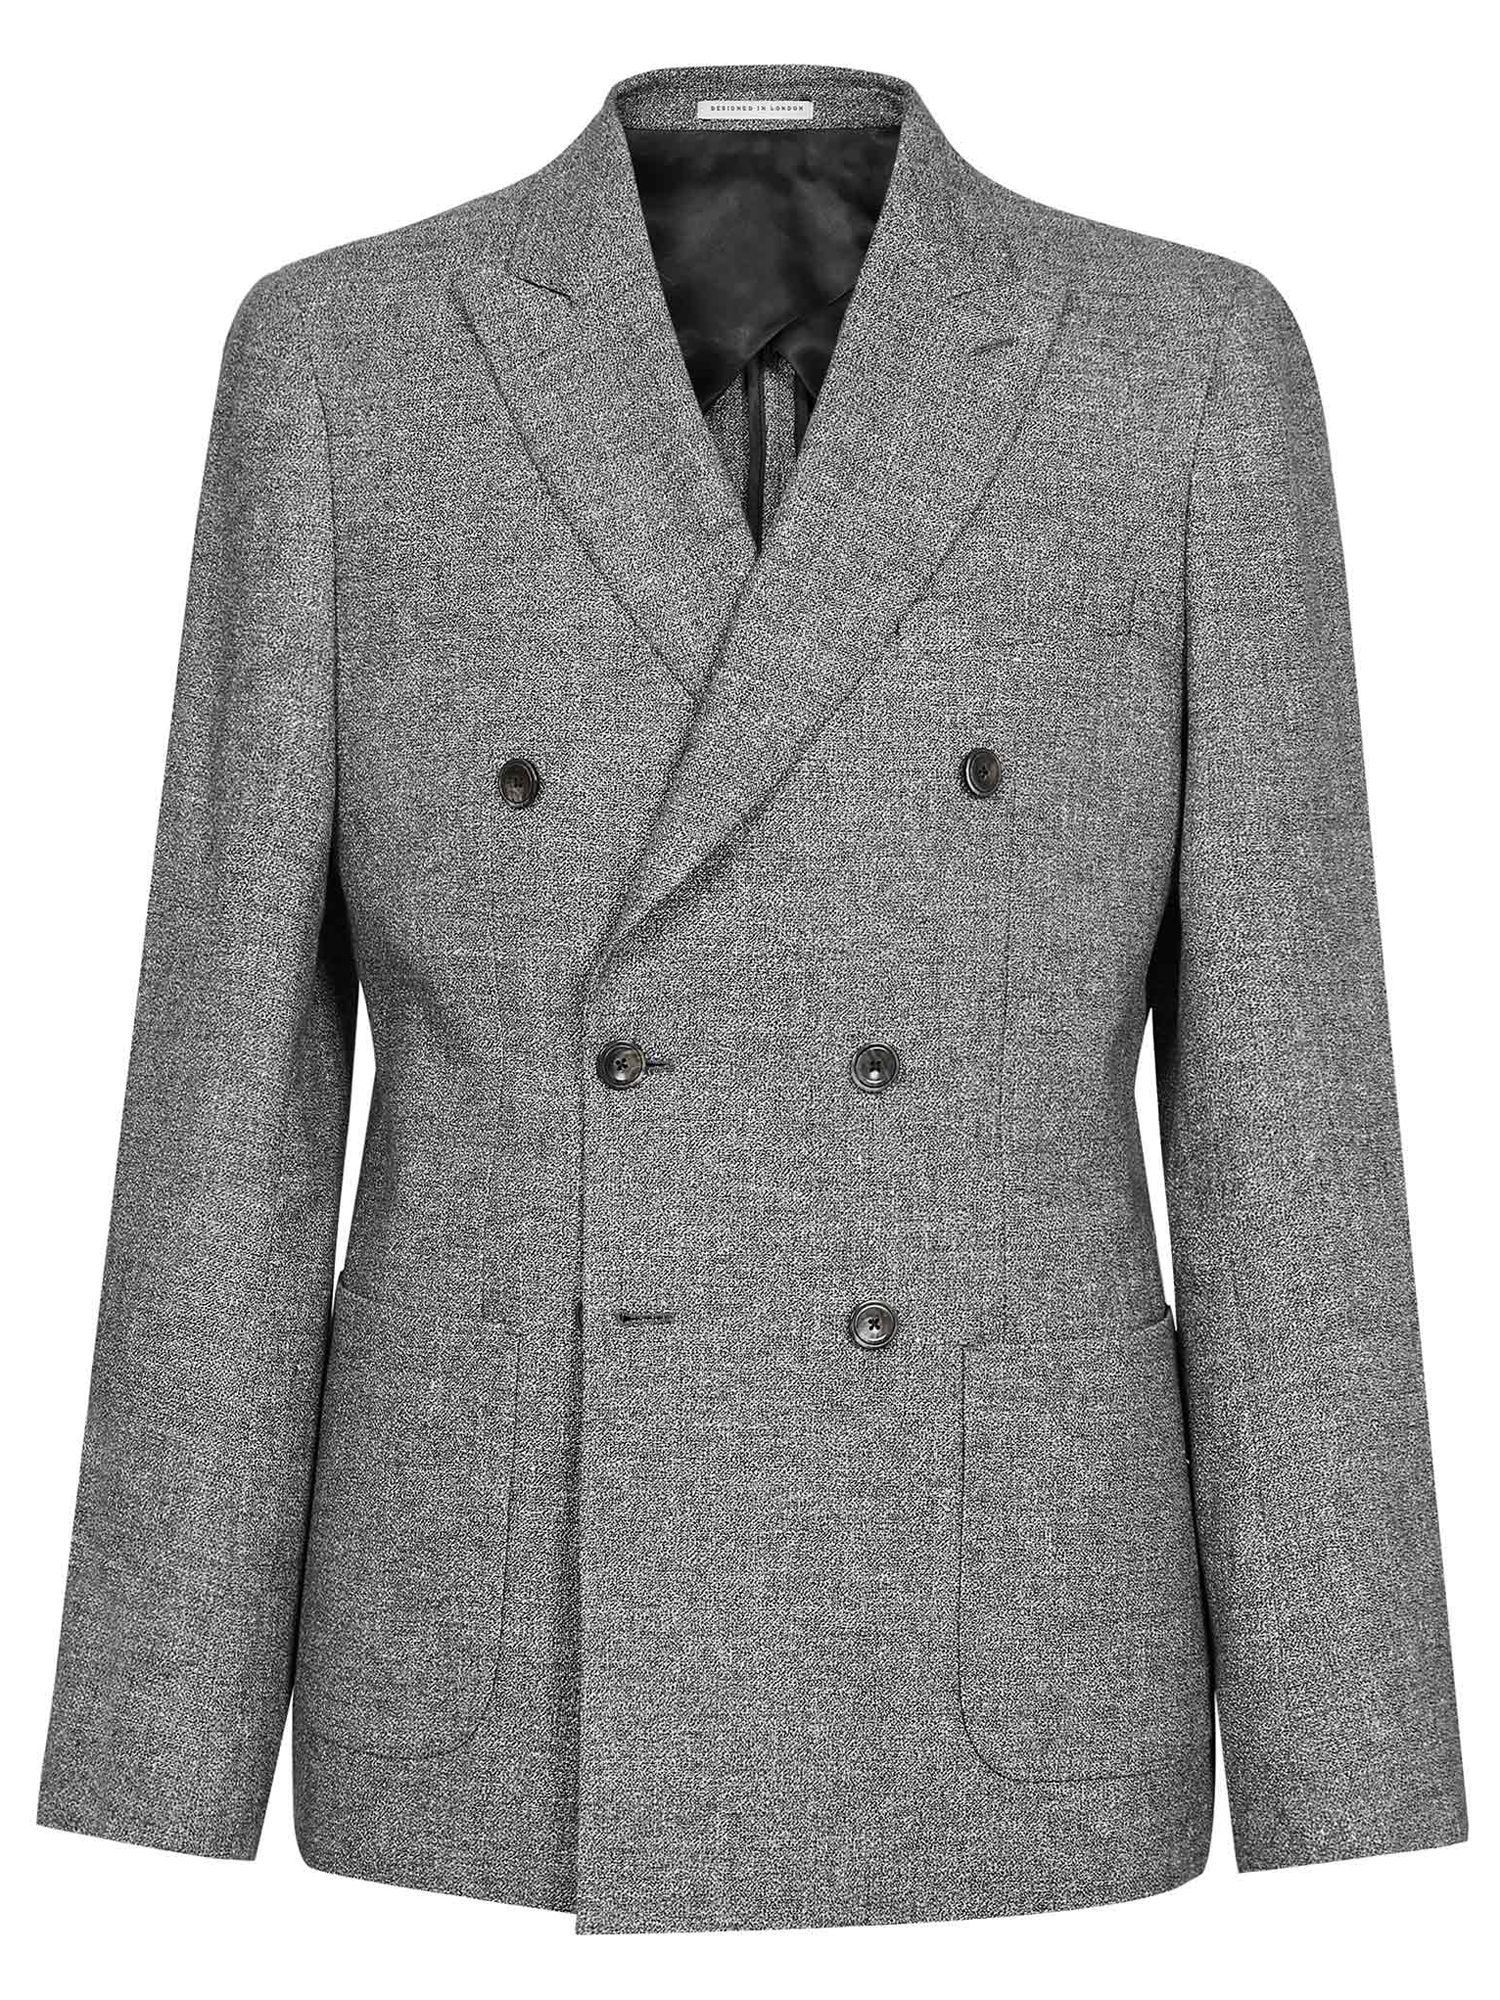 Reiss Tribe Double Breasted Linen Cotton Slim Fit Suit Jacket, Grey